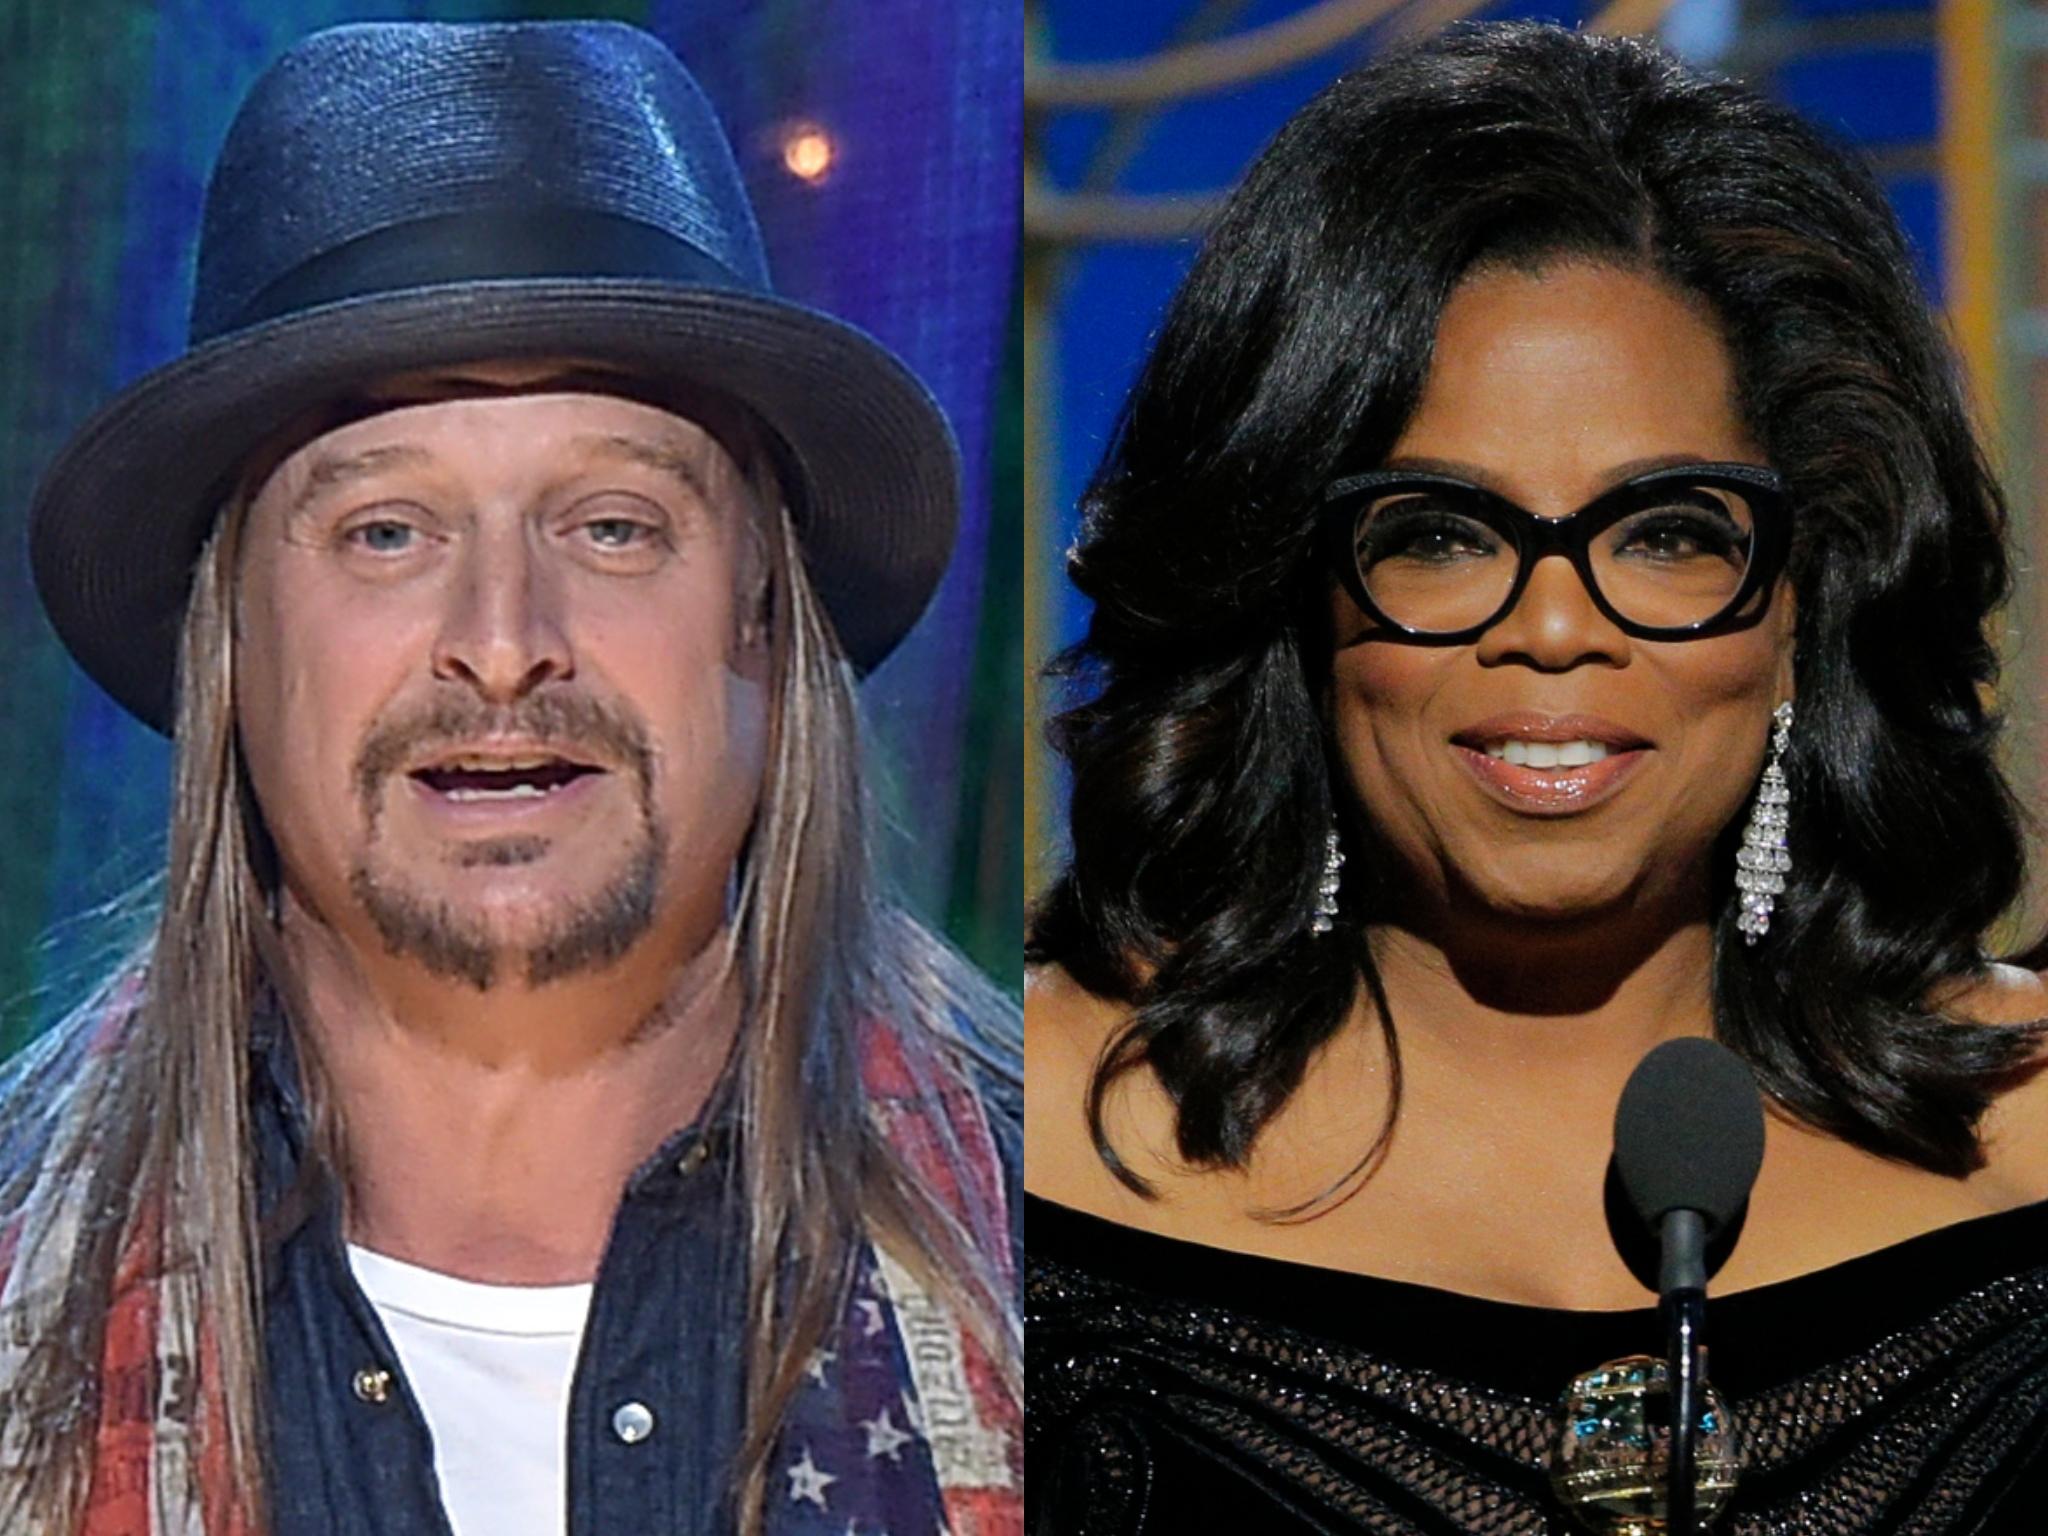 F*** her Kid Rock escorted off stage after drunken rant about Oprah Winfrey The Independent The Independent picture